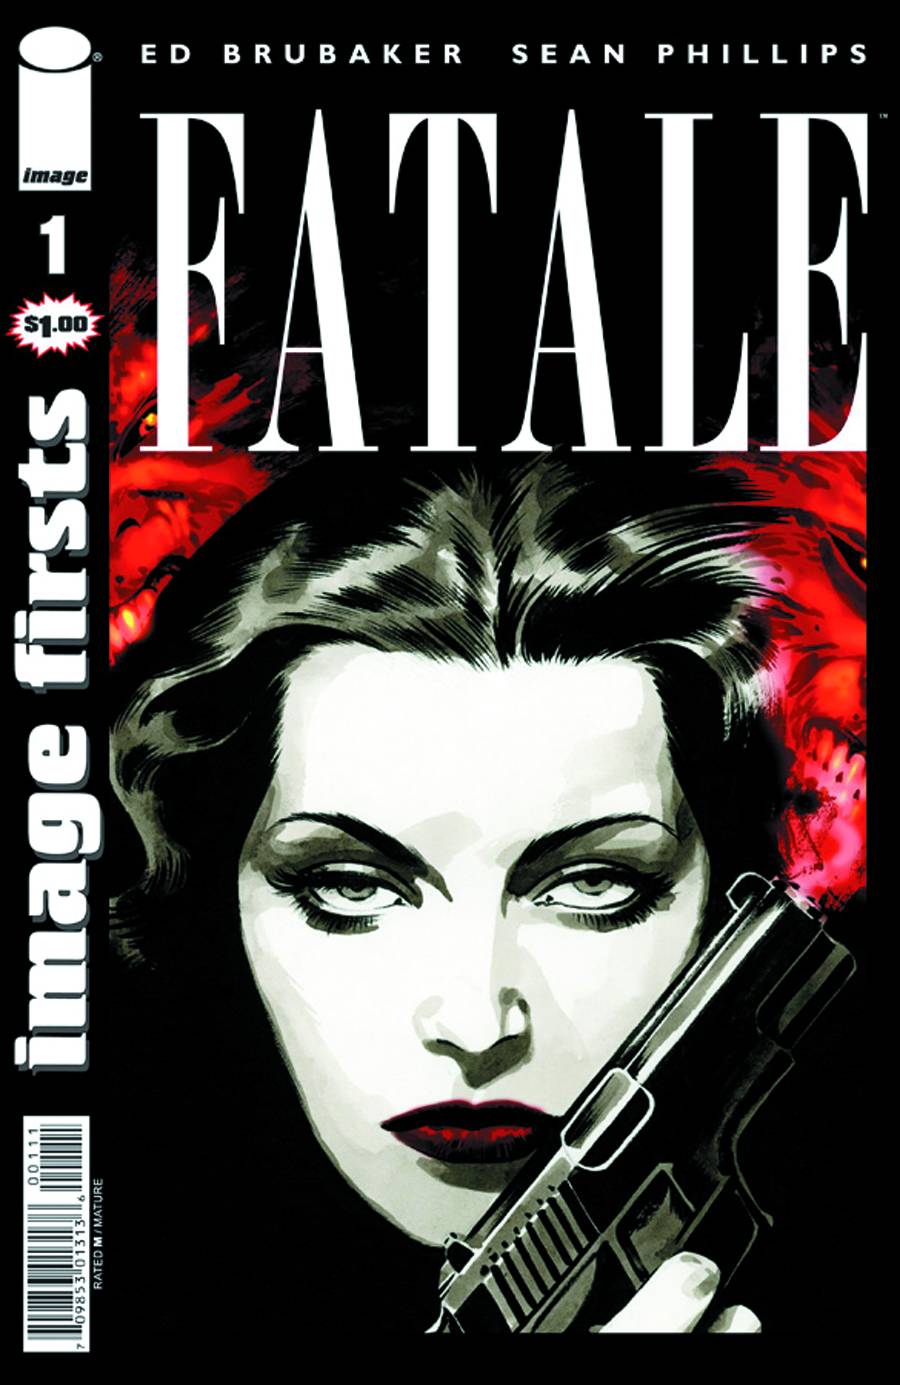 Image Firsts: Fatale no.1 (1 for 1)